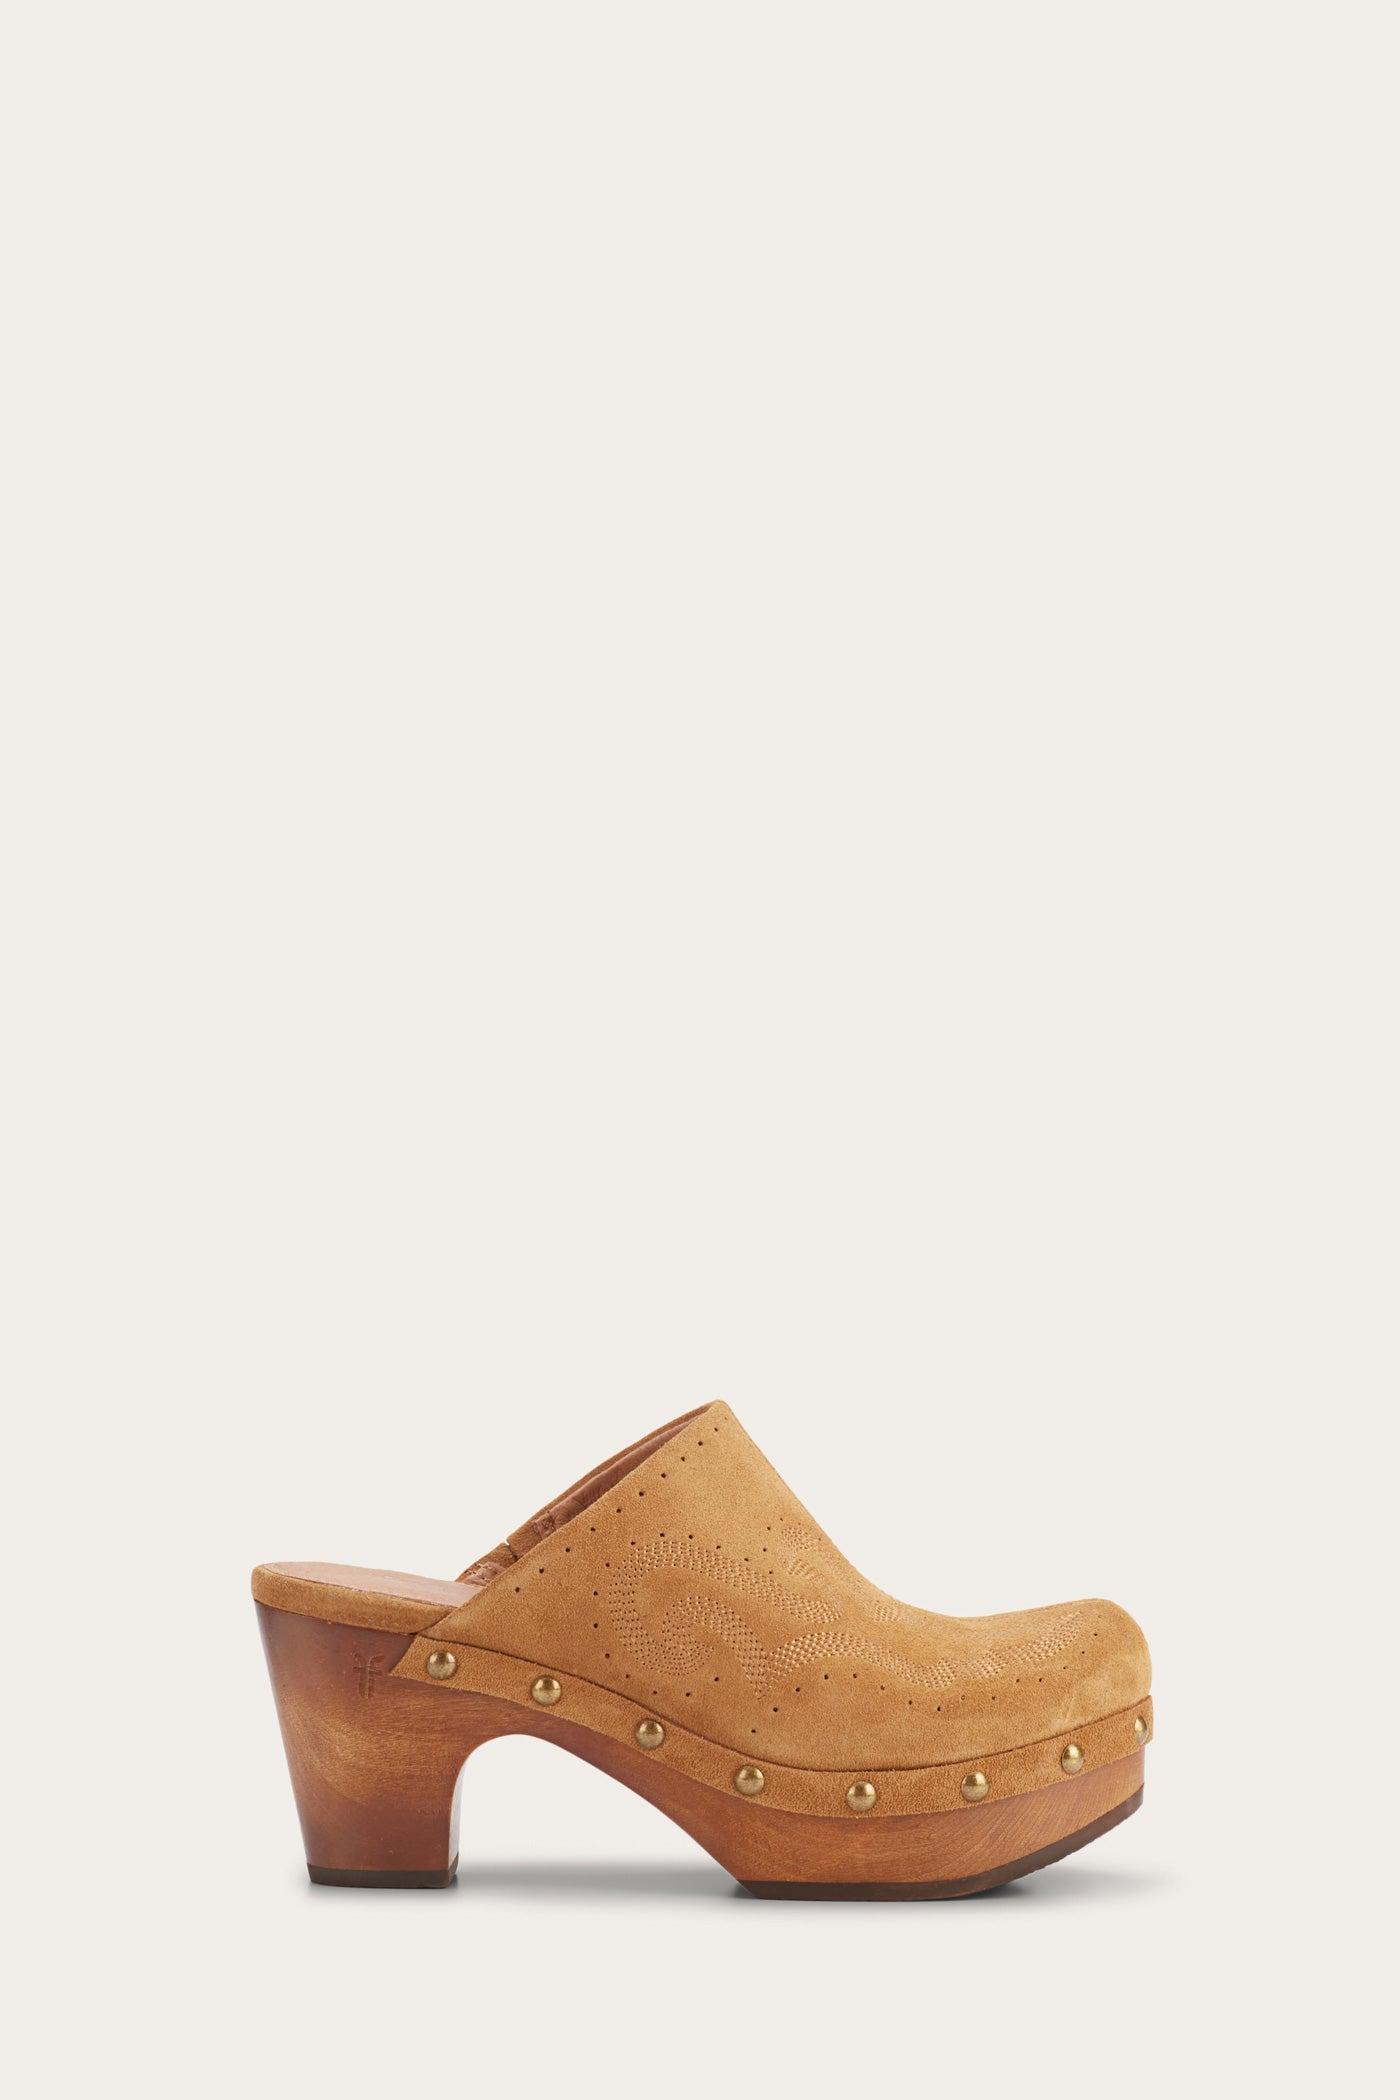 Frye Jessica Clog in Natural | Lyst